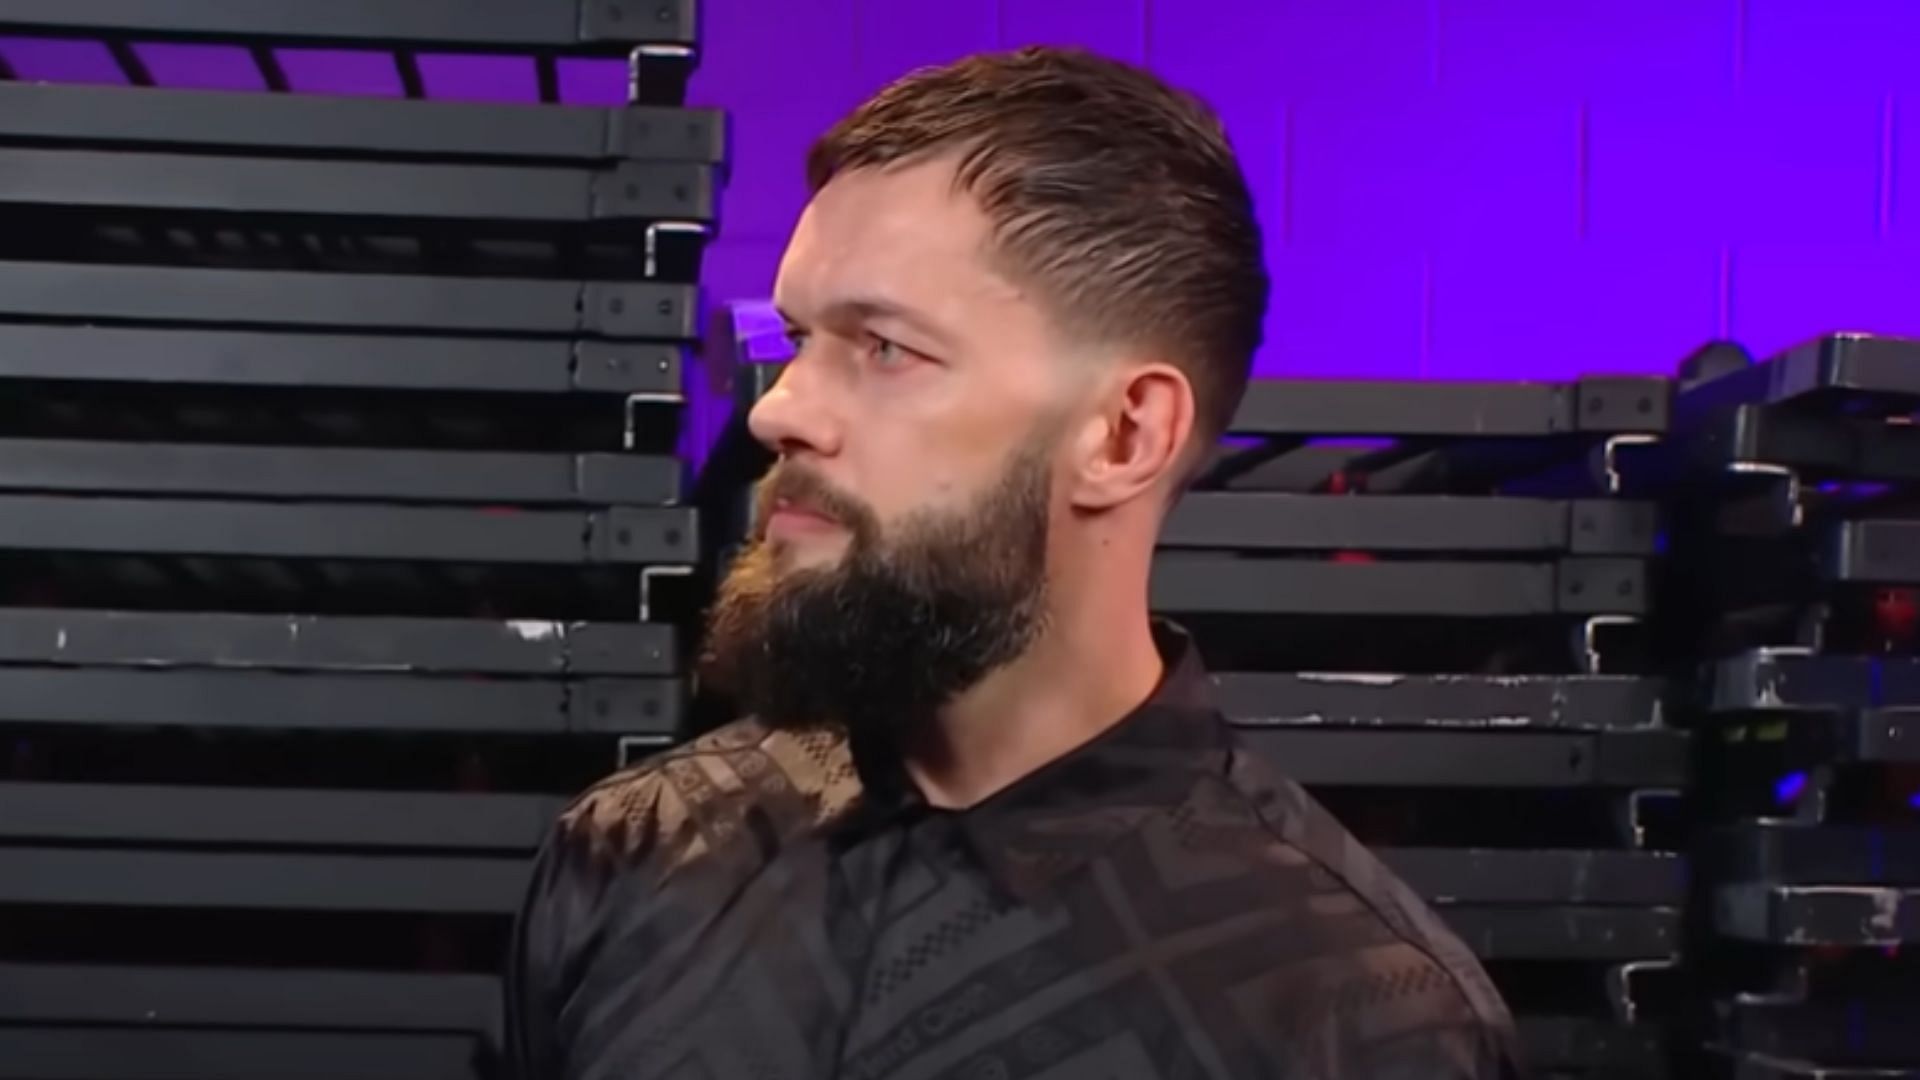 Finn Balor joined The Judgment Day in June 2022